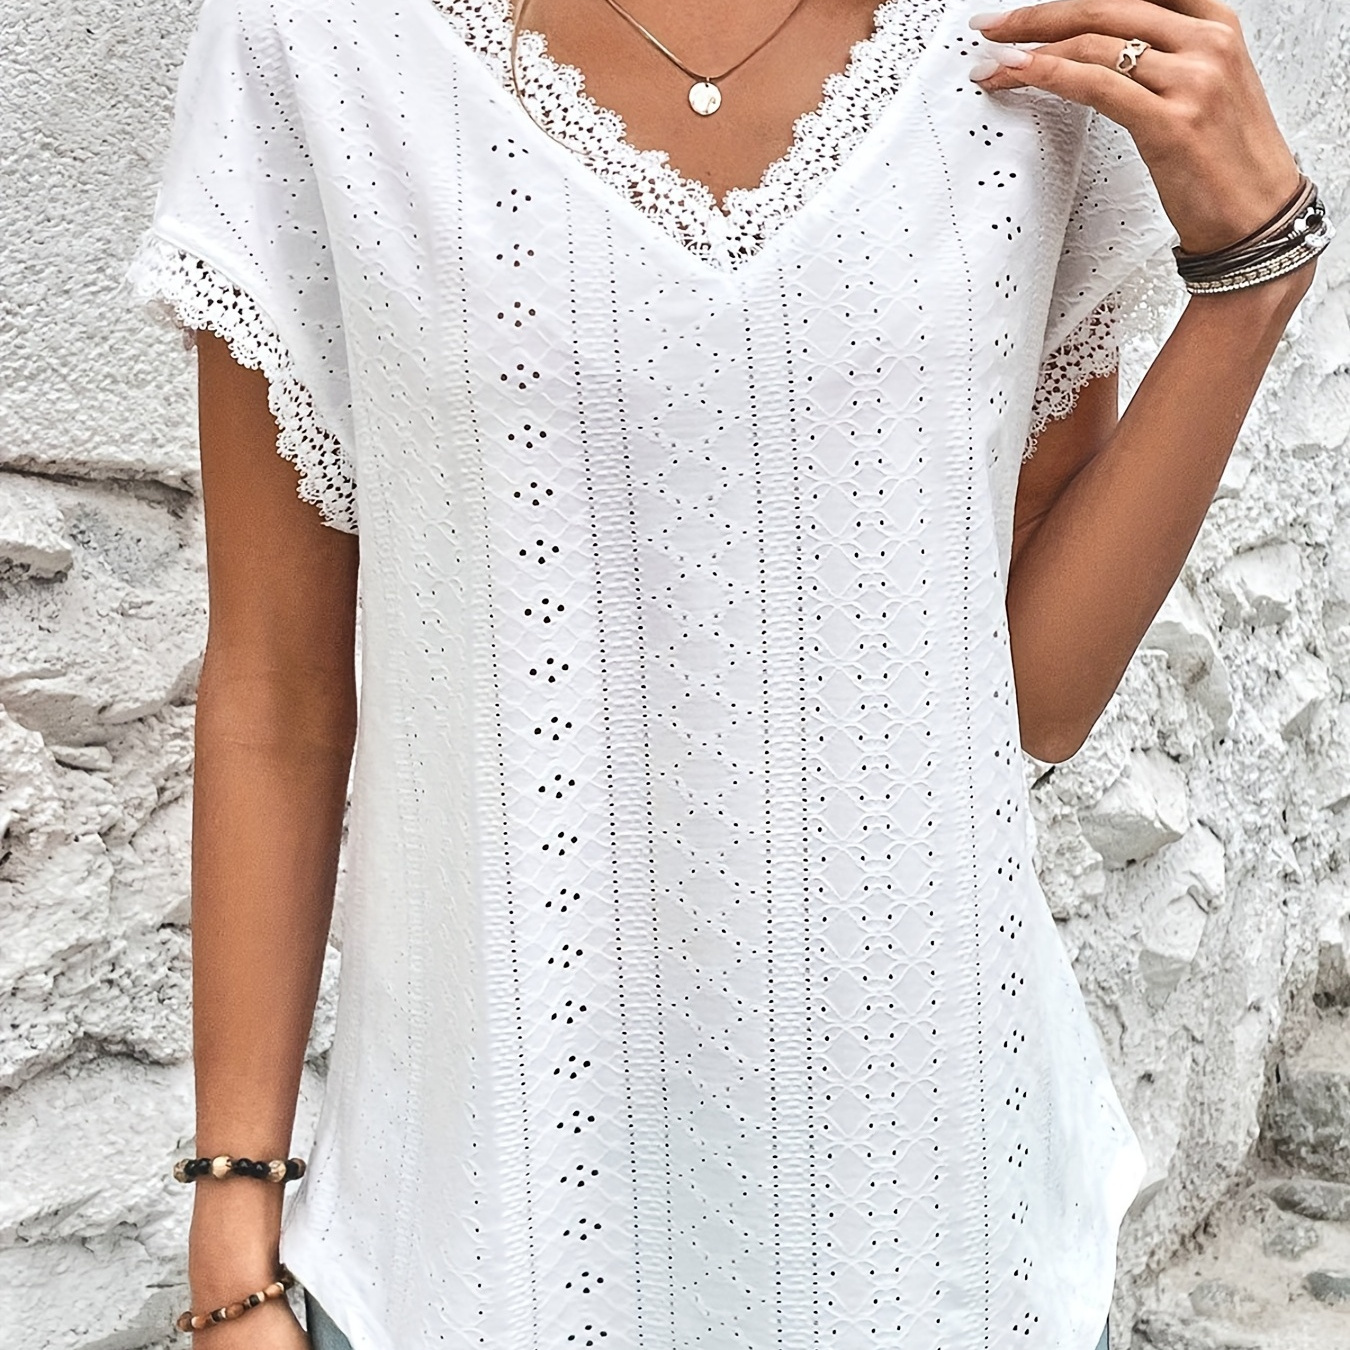 Lace Trim Eyelet Blouse, V Neck Loose Casual Top For Spring & Summer, Women's Clothing